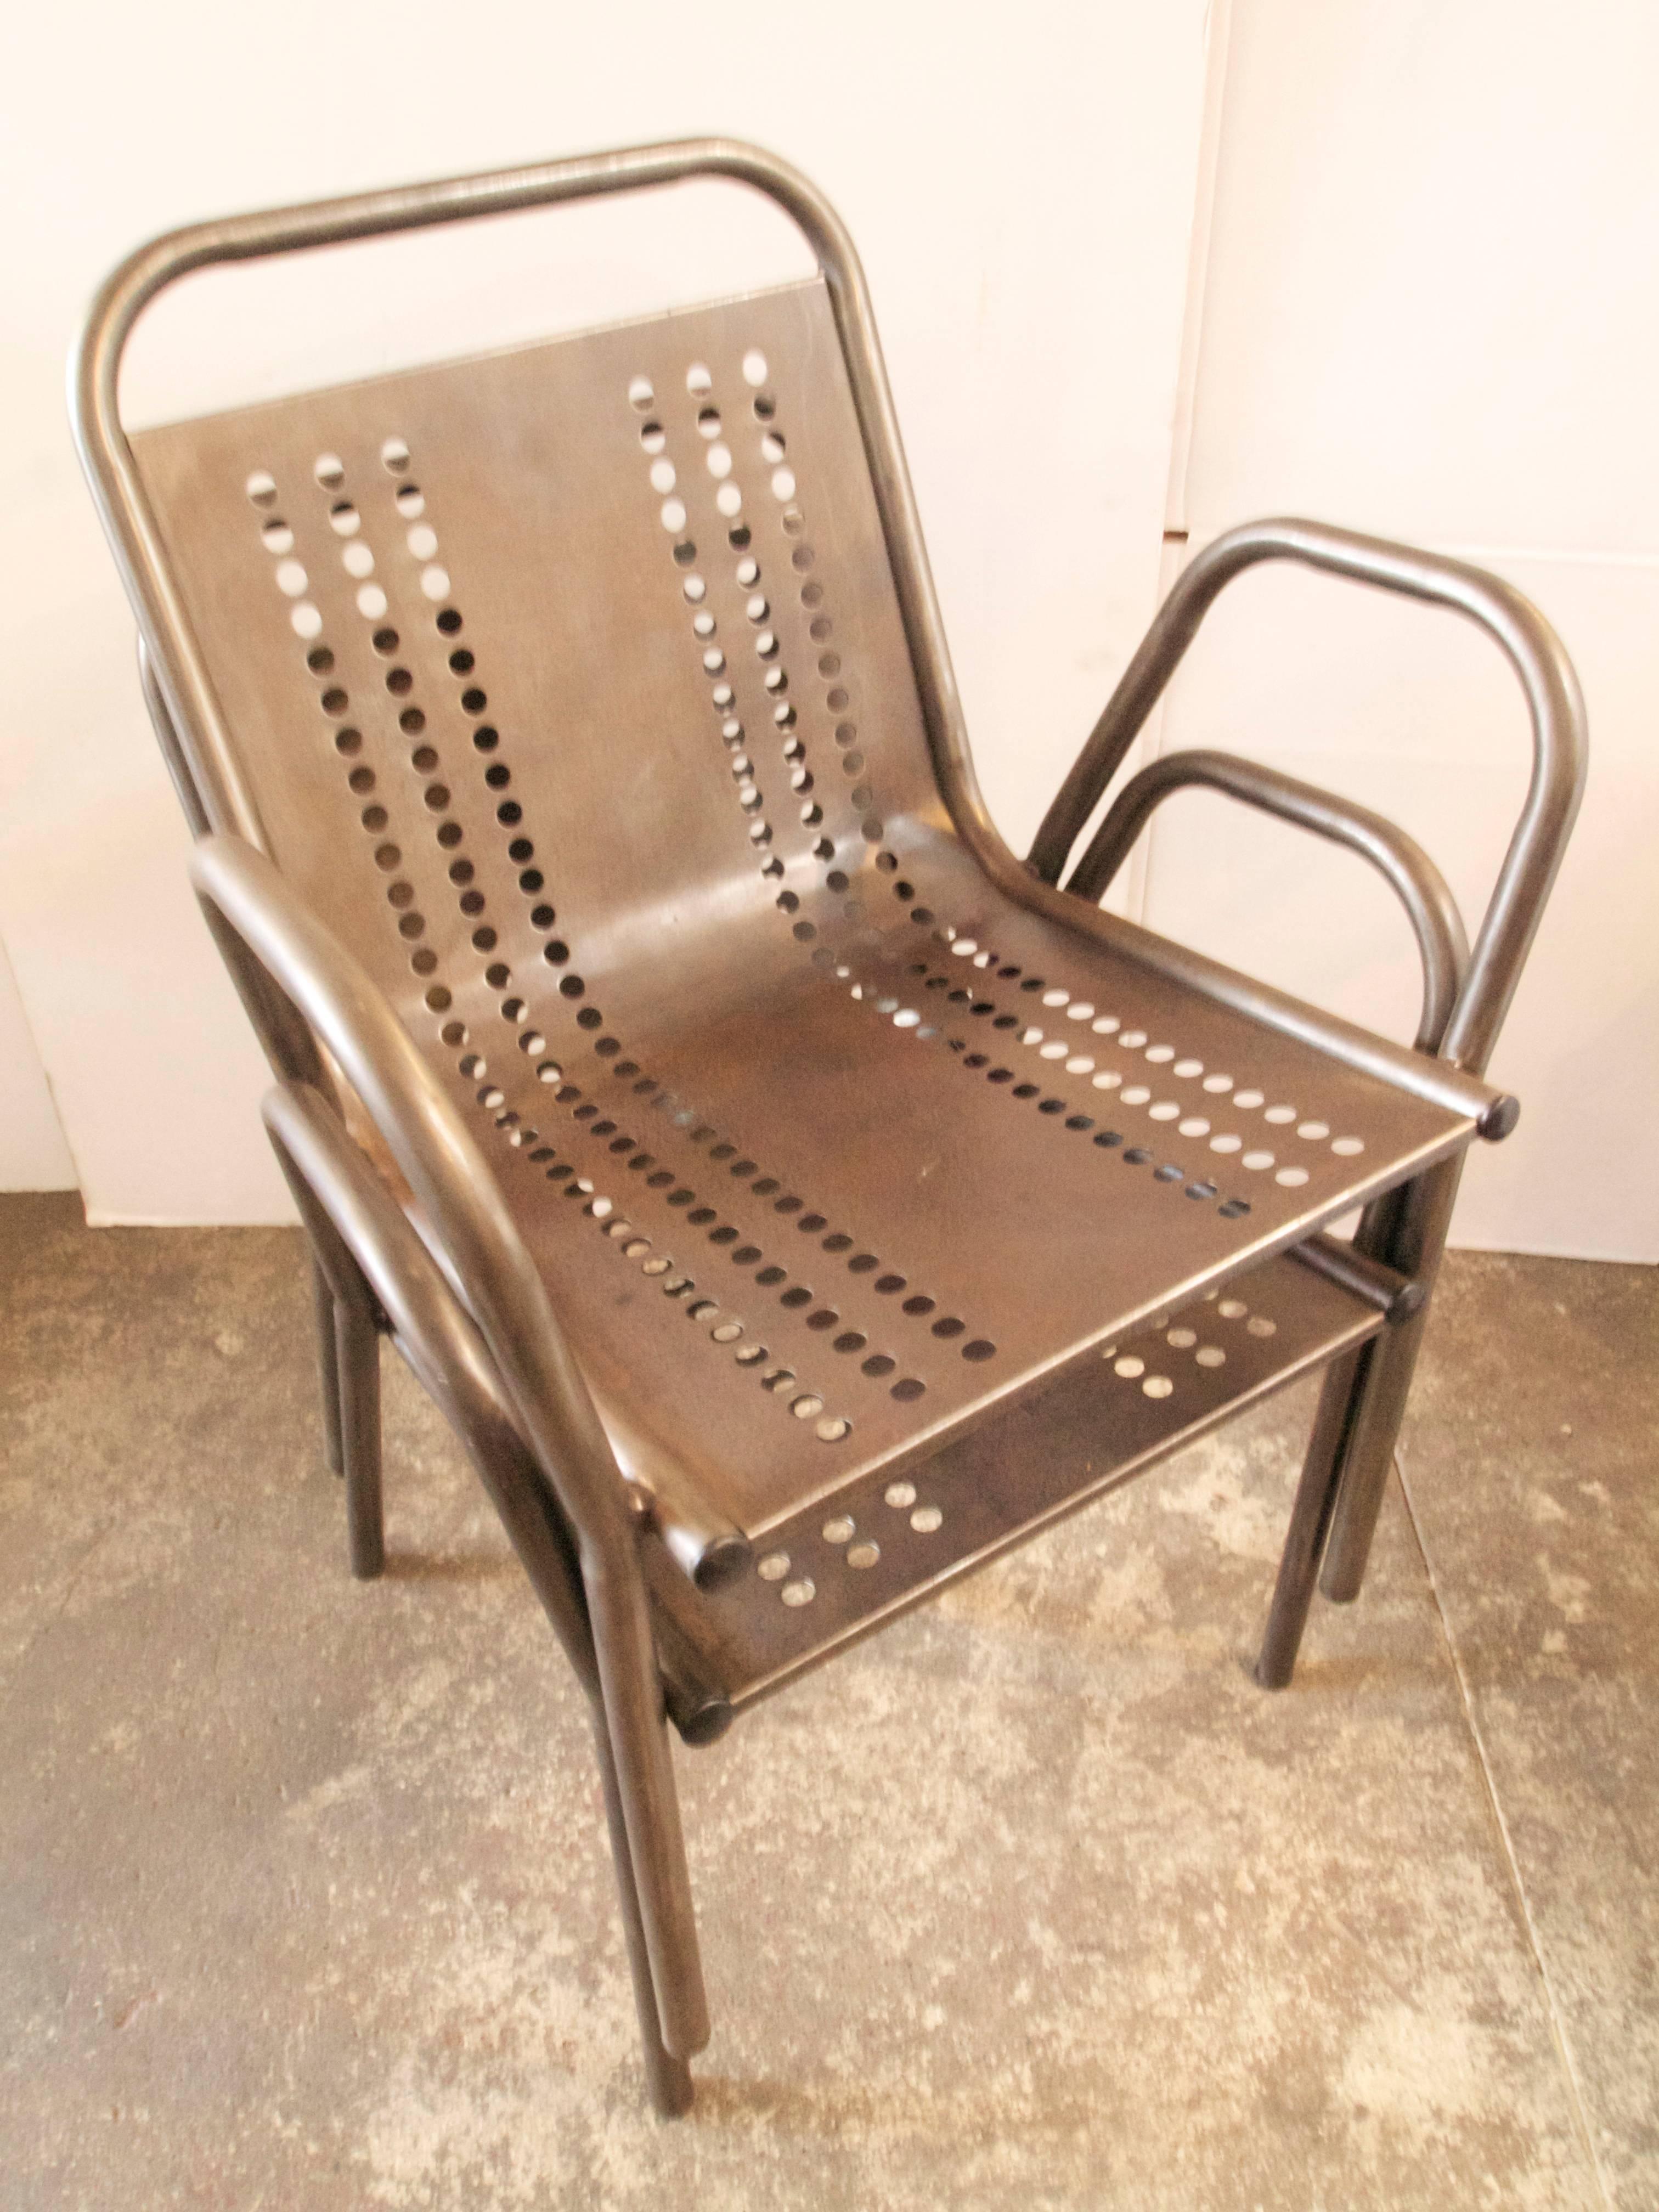 Pair of French Industrial Steel Lounge Chairs 1